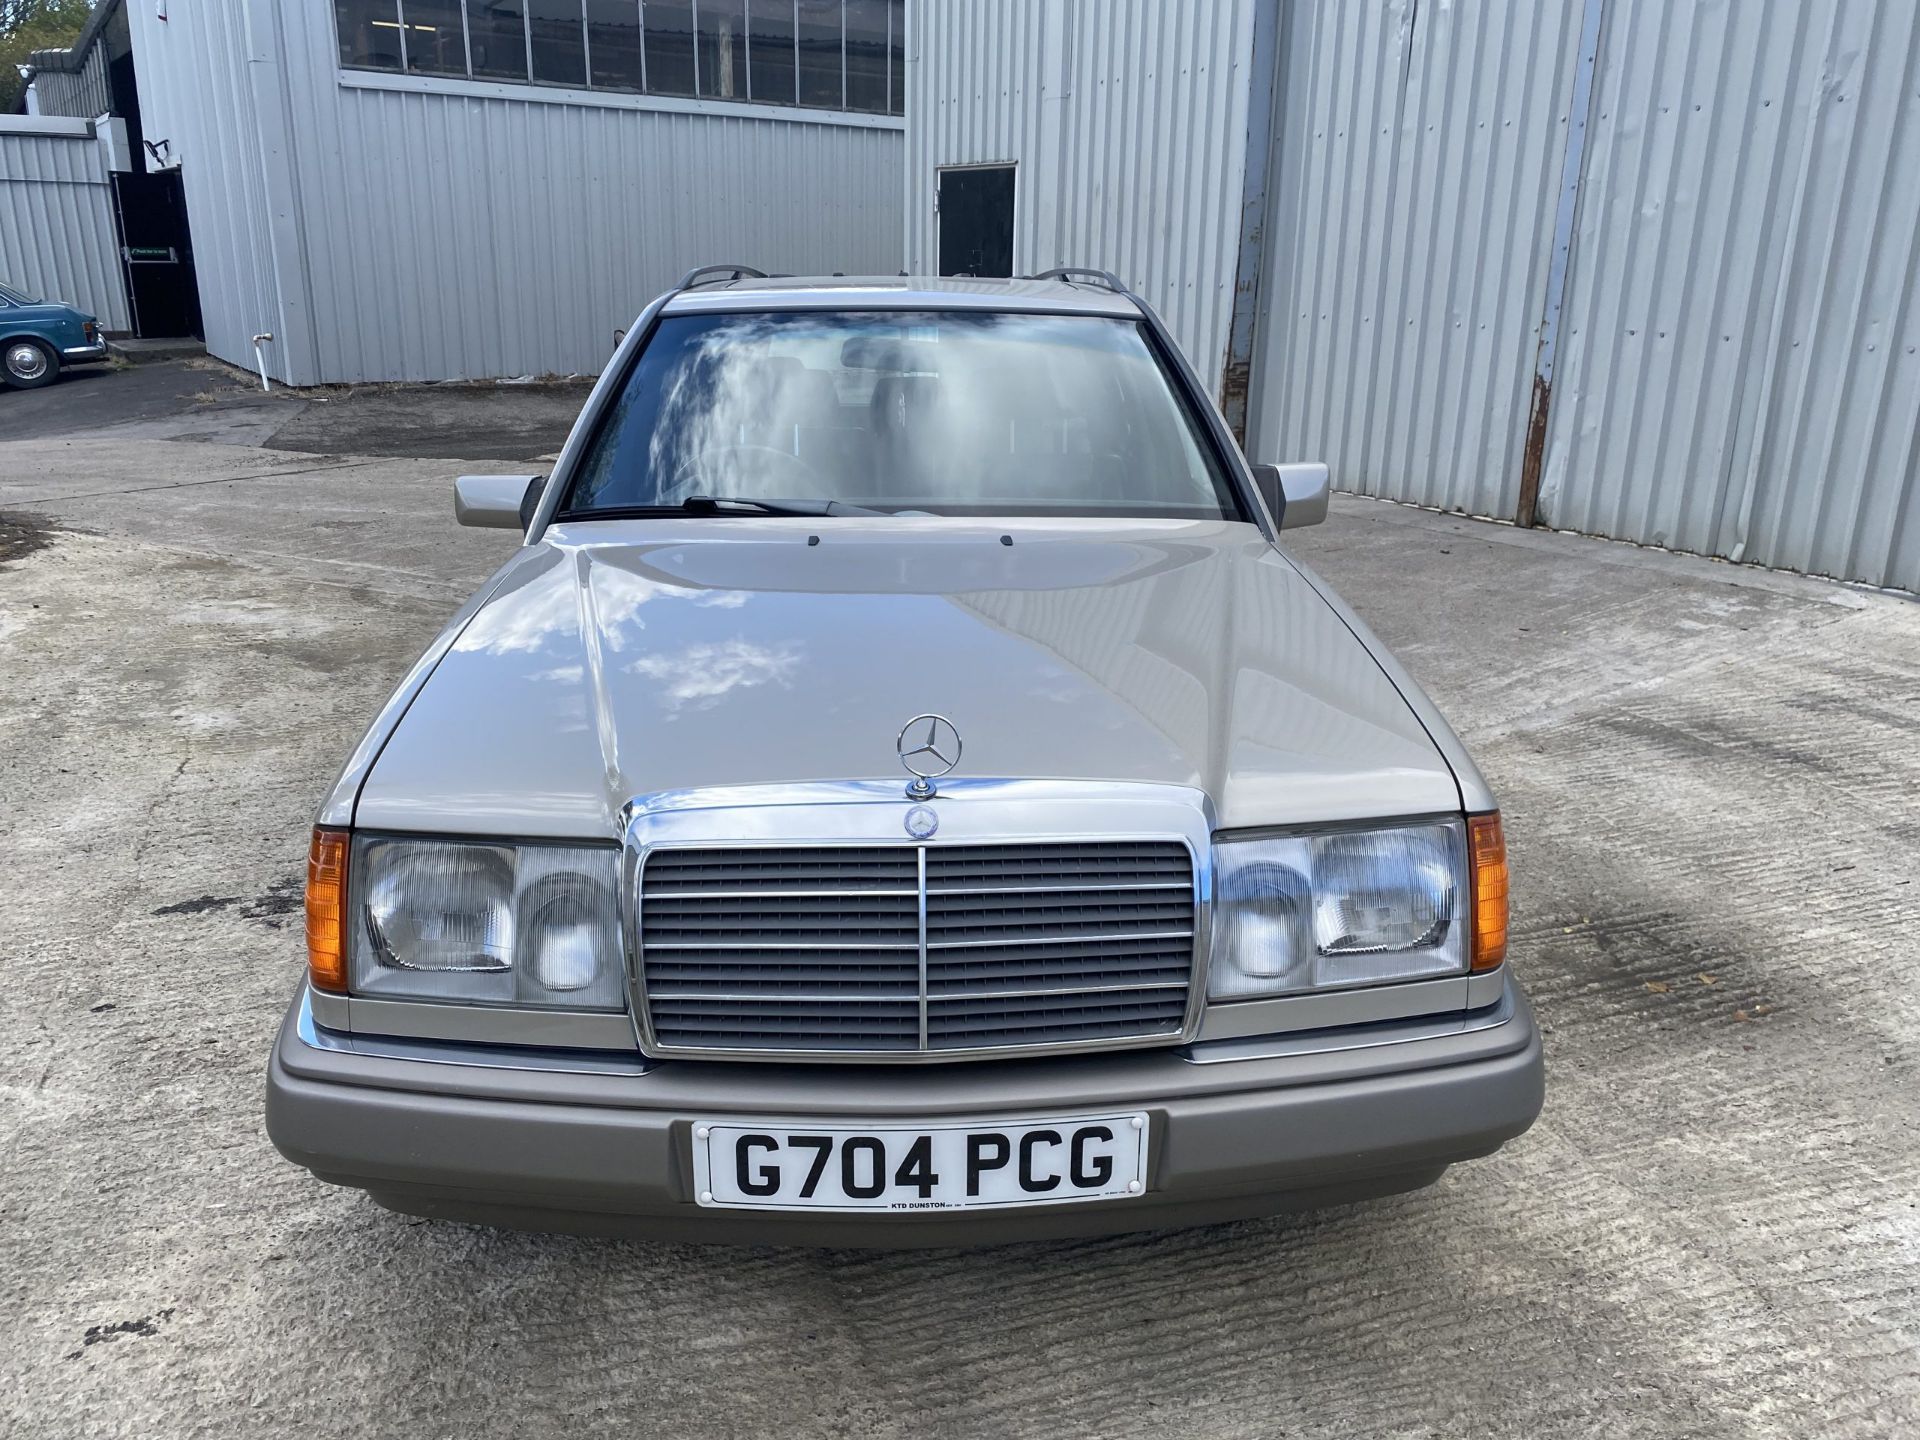 Mercedes 300-24 - Image 17 of 49